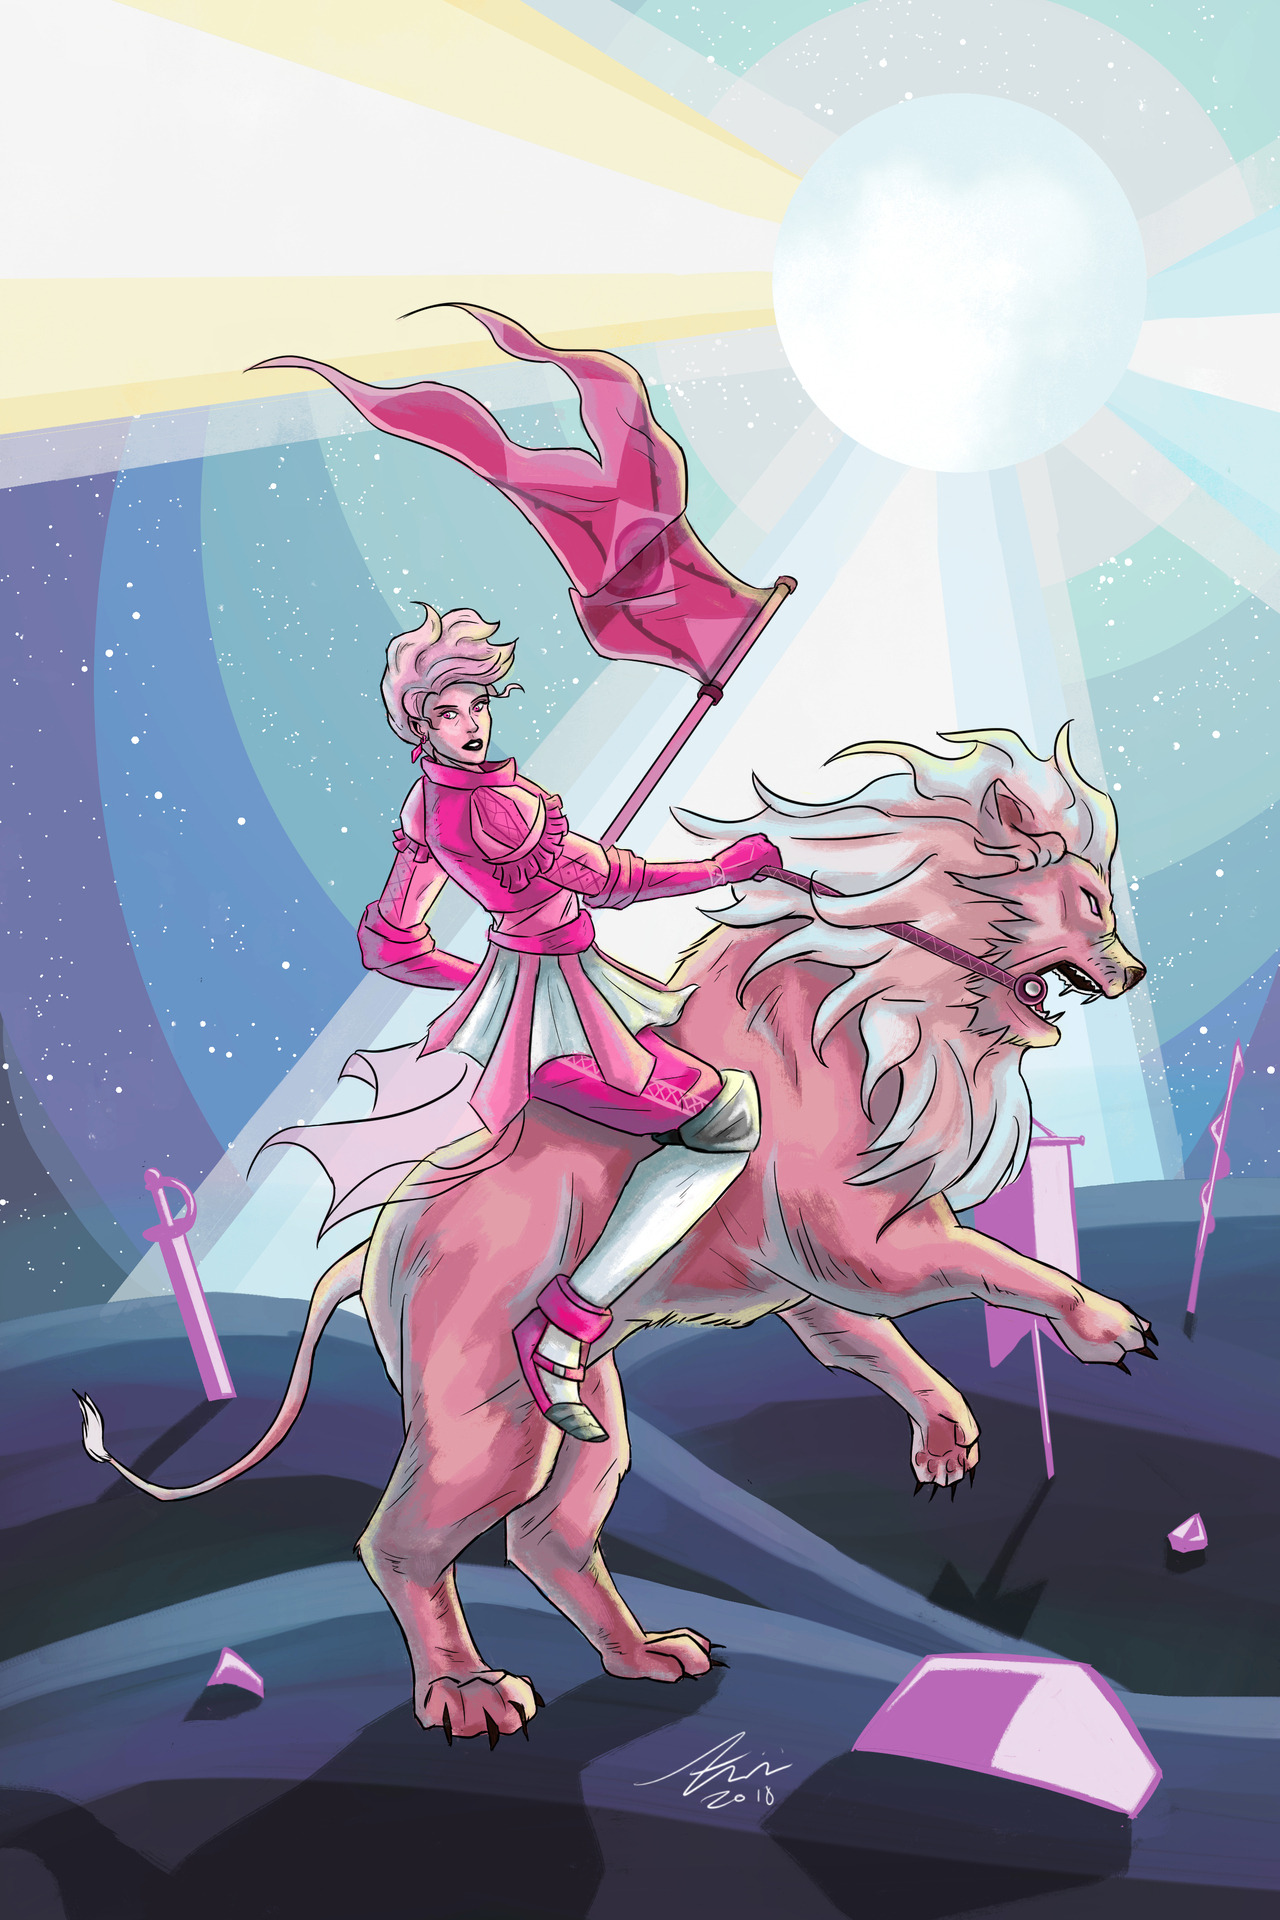 “Screw you homeworld, I’m going to start a rebellion! And I’m taking the lion with me!” - Pink Diamond, probably EDIT: Updated lineart slightly